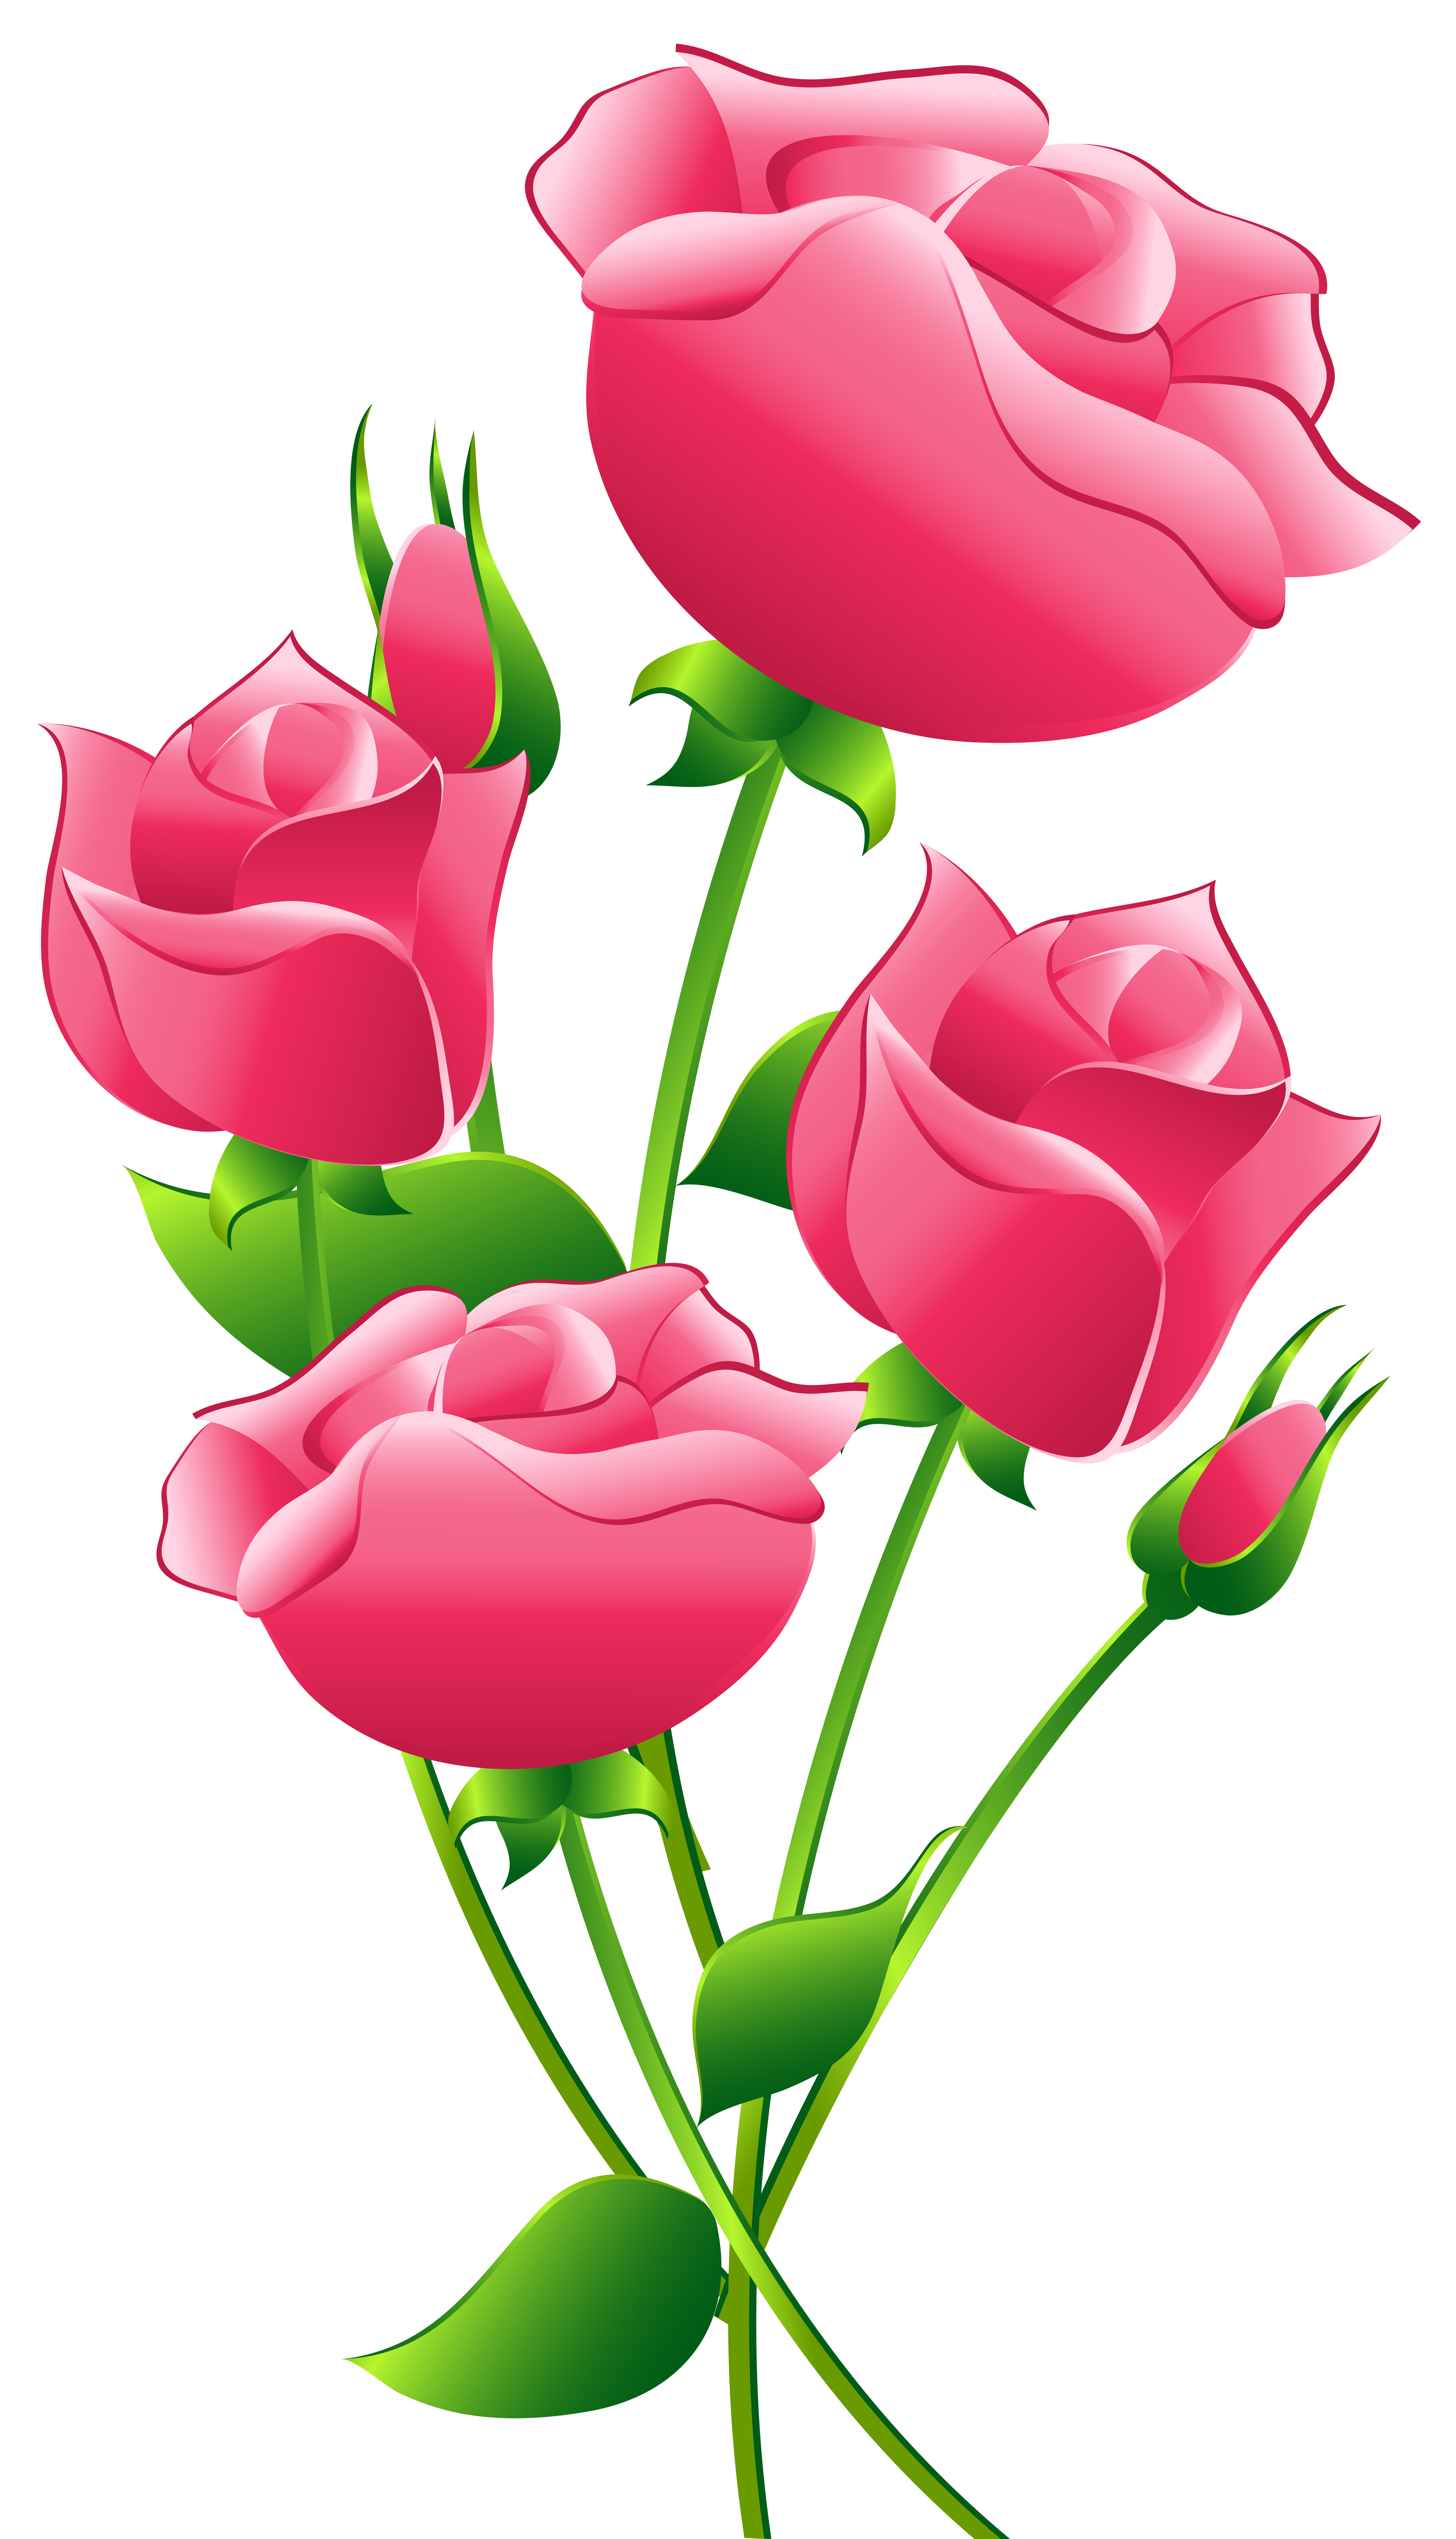 Related Clip Art. Pink roses 